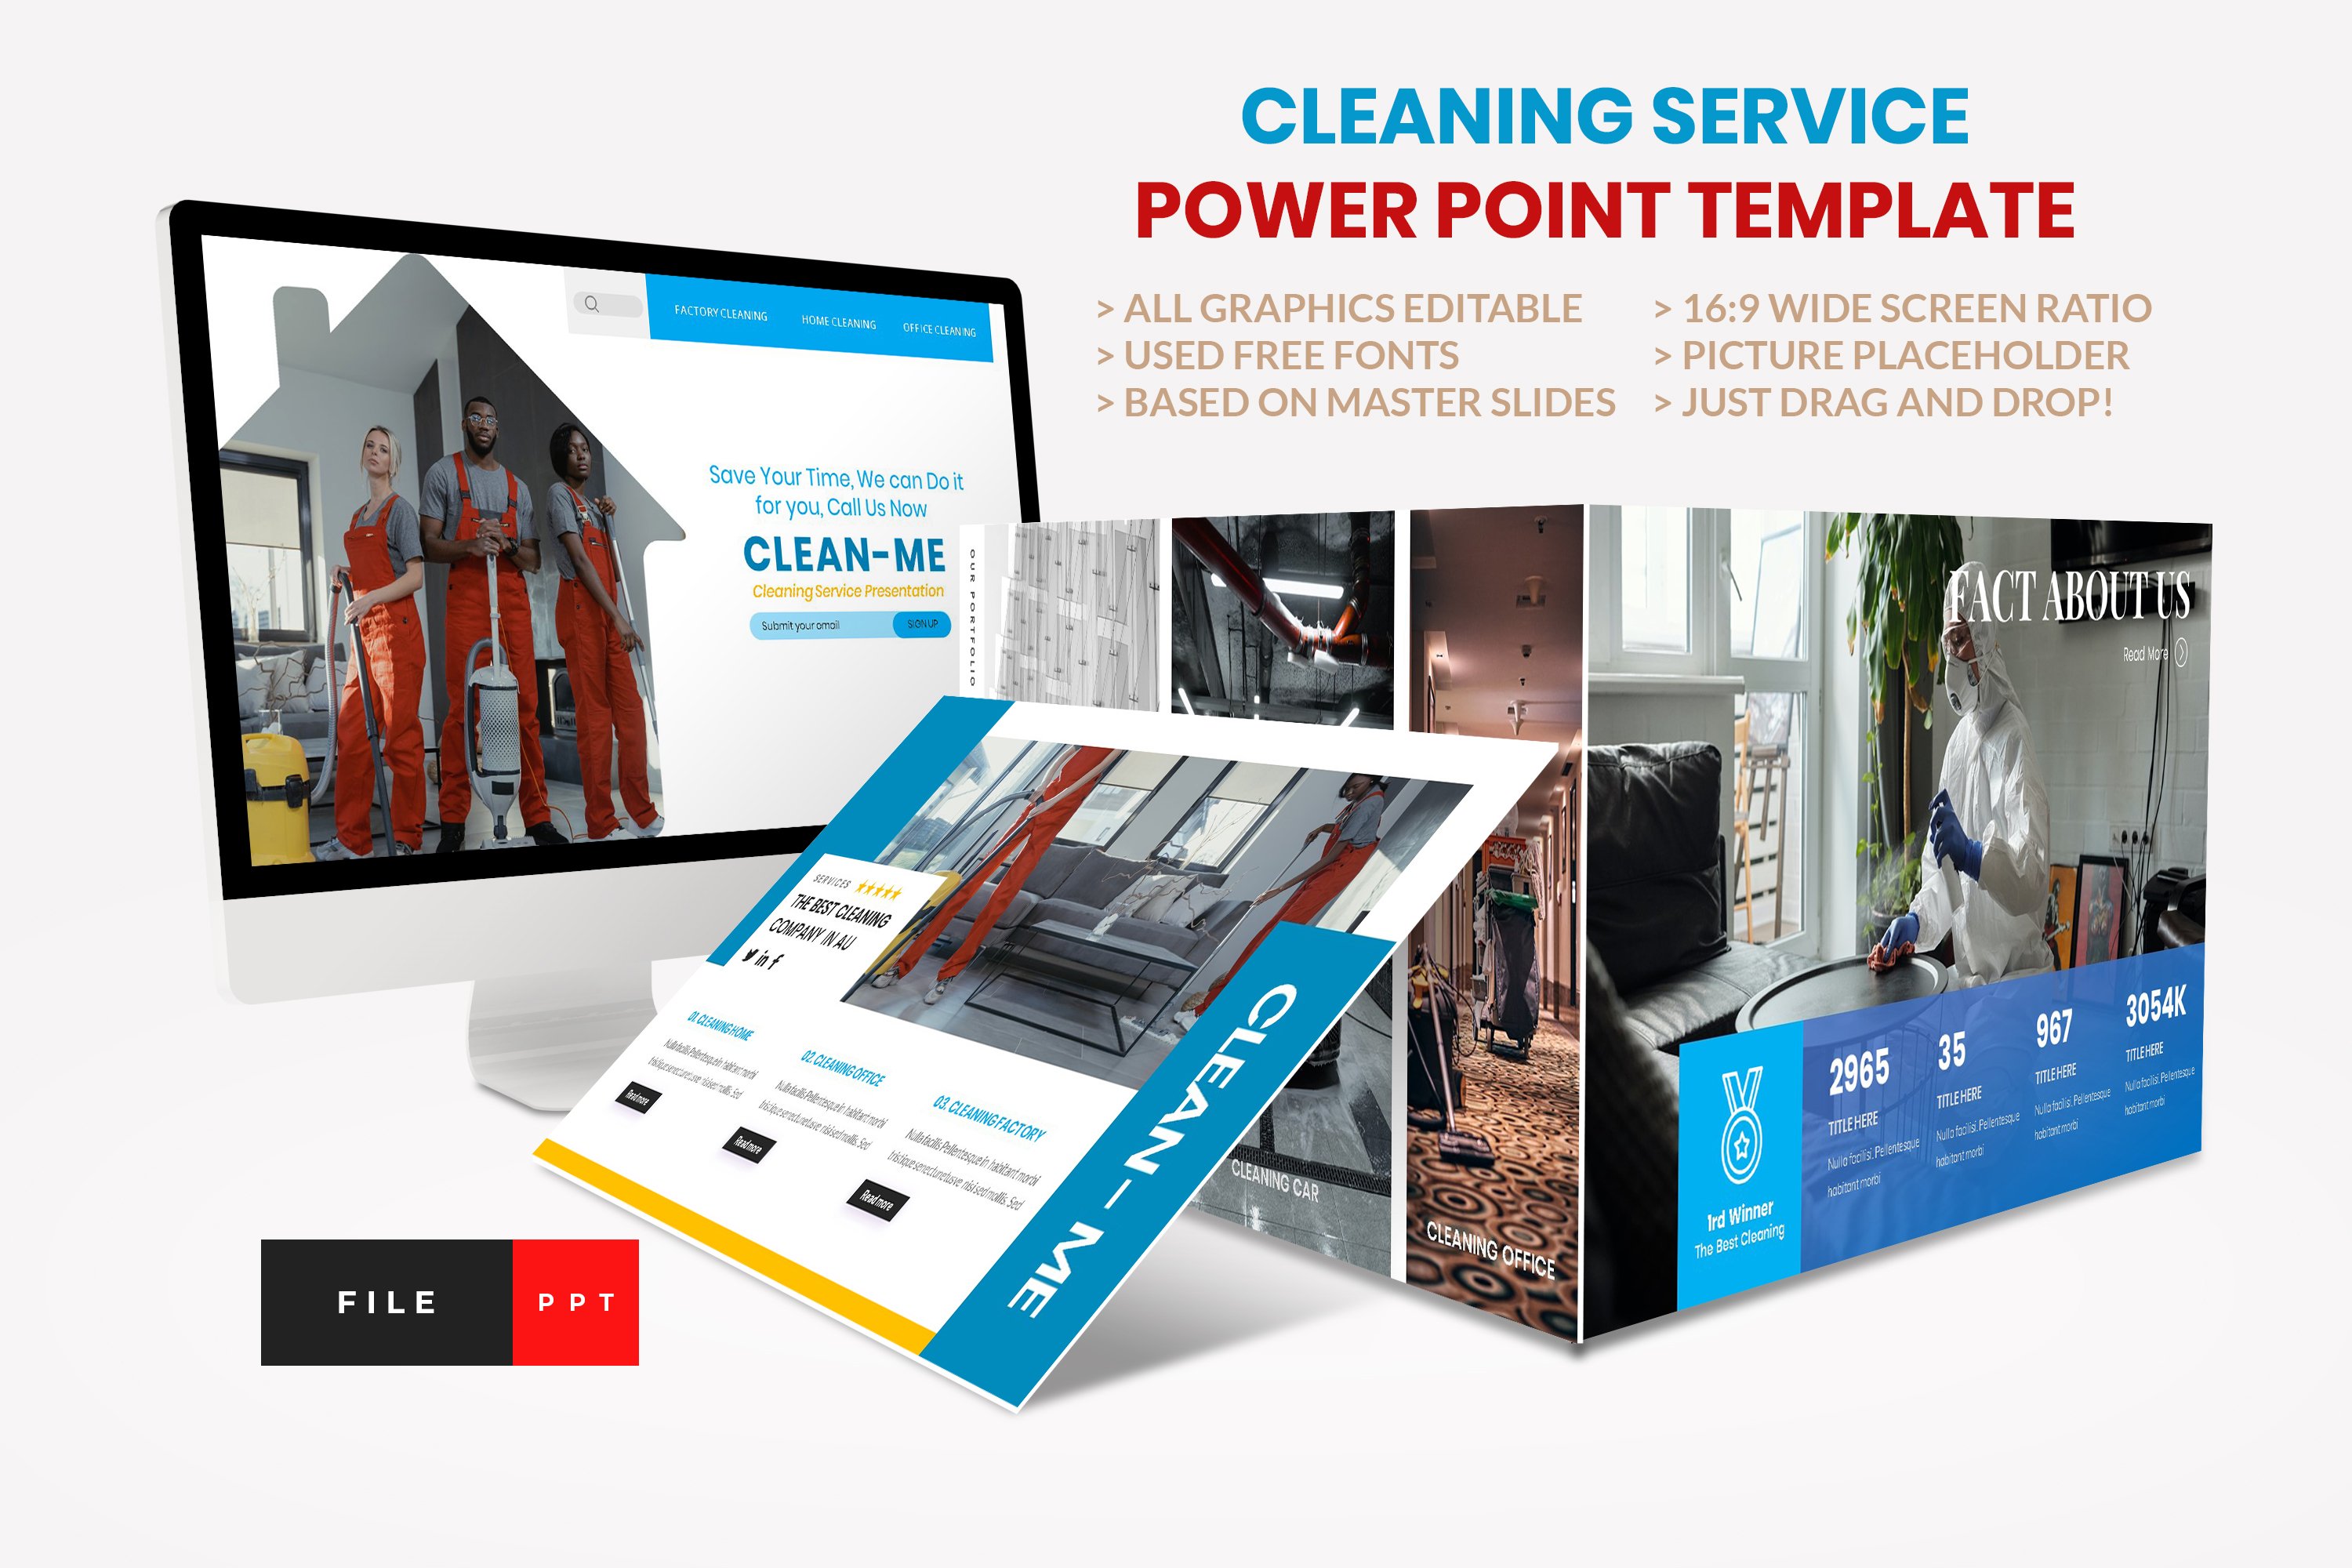 Cleaning Service Power Point cover image.